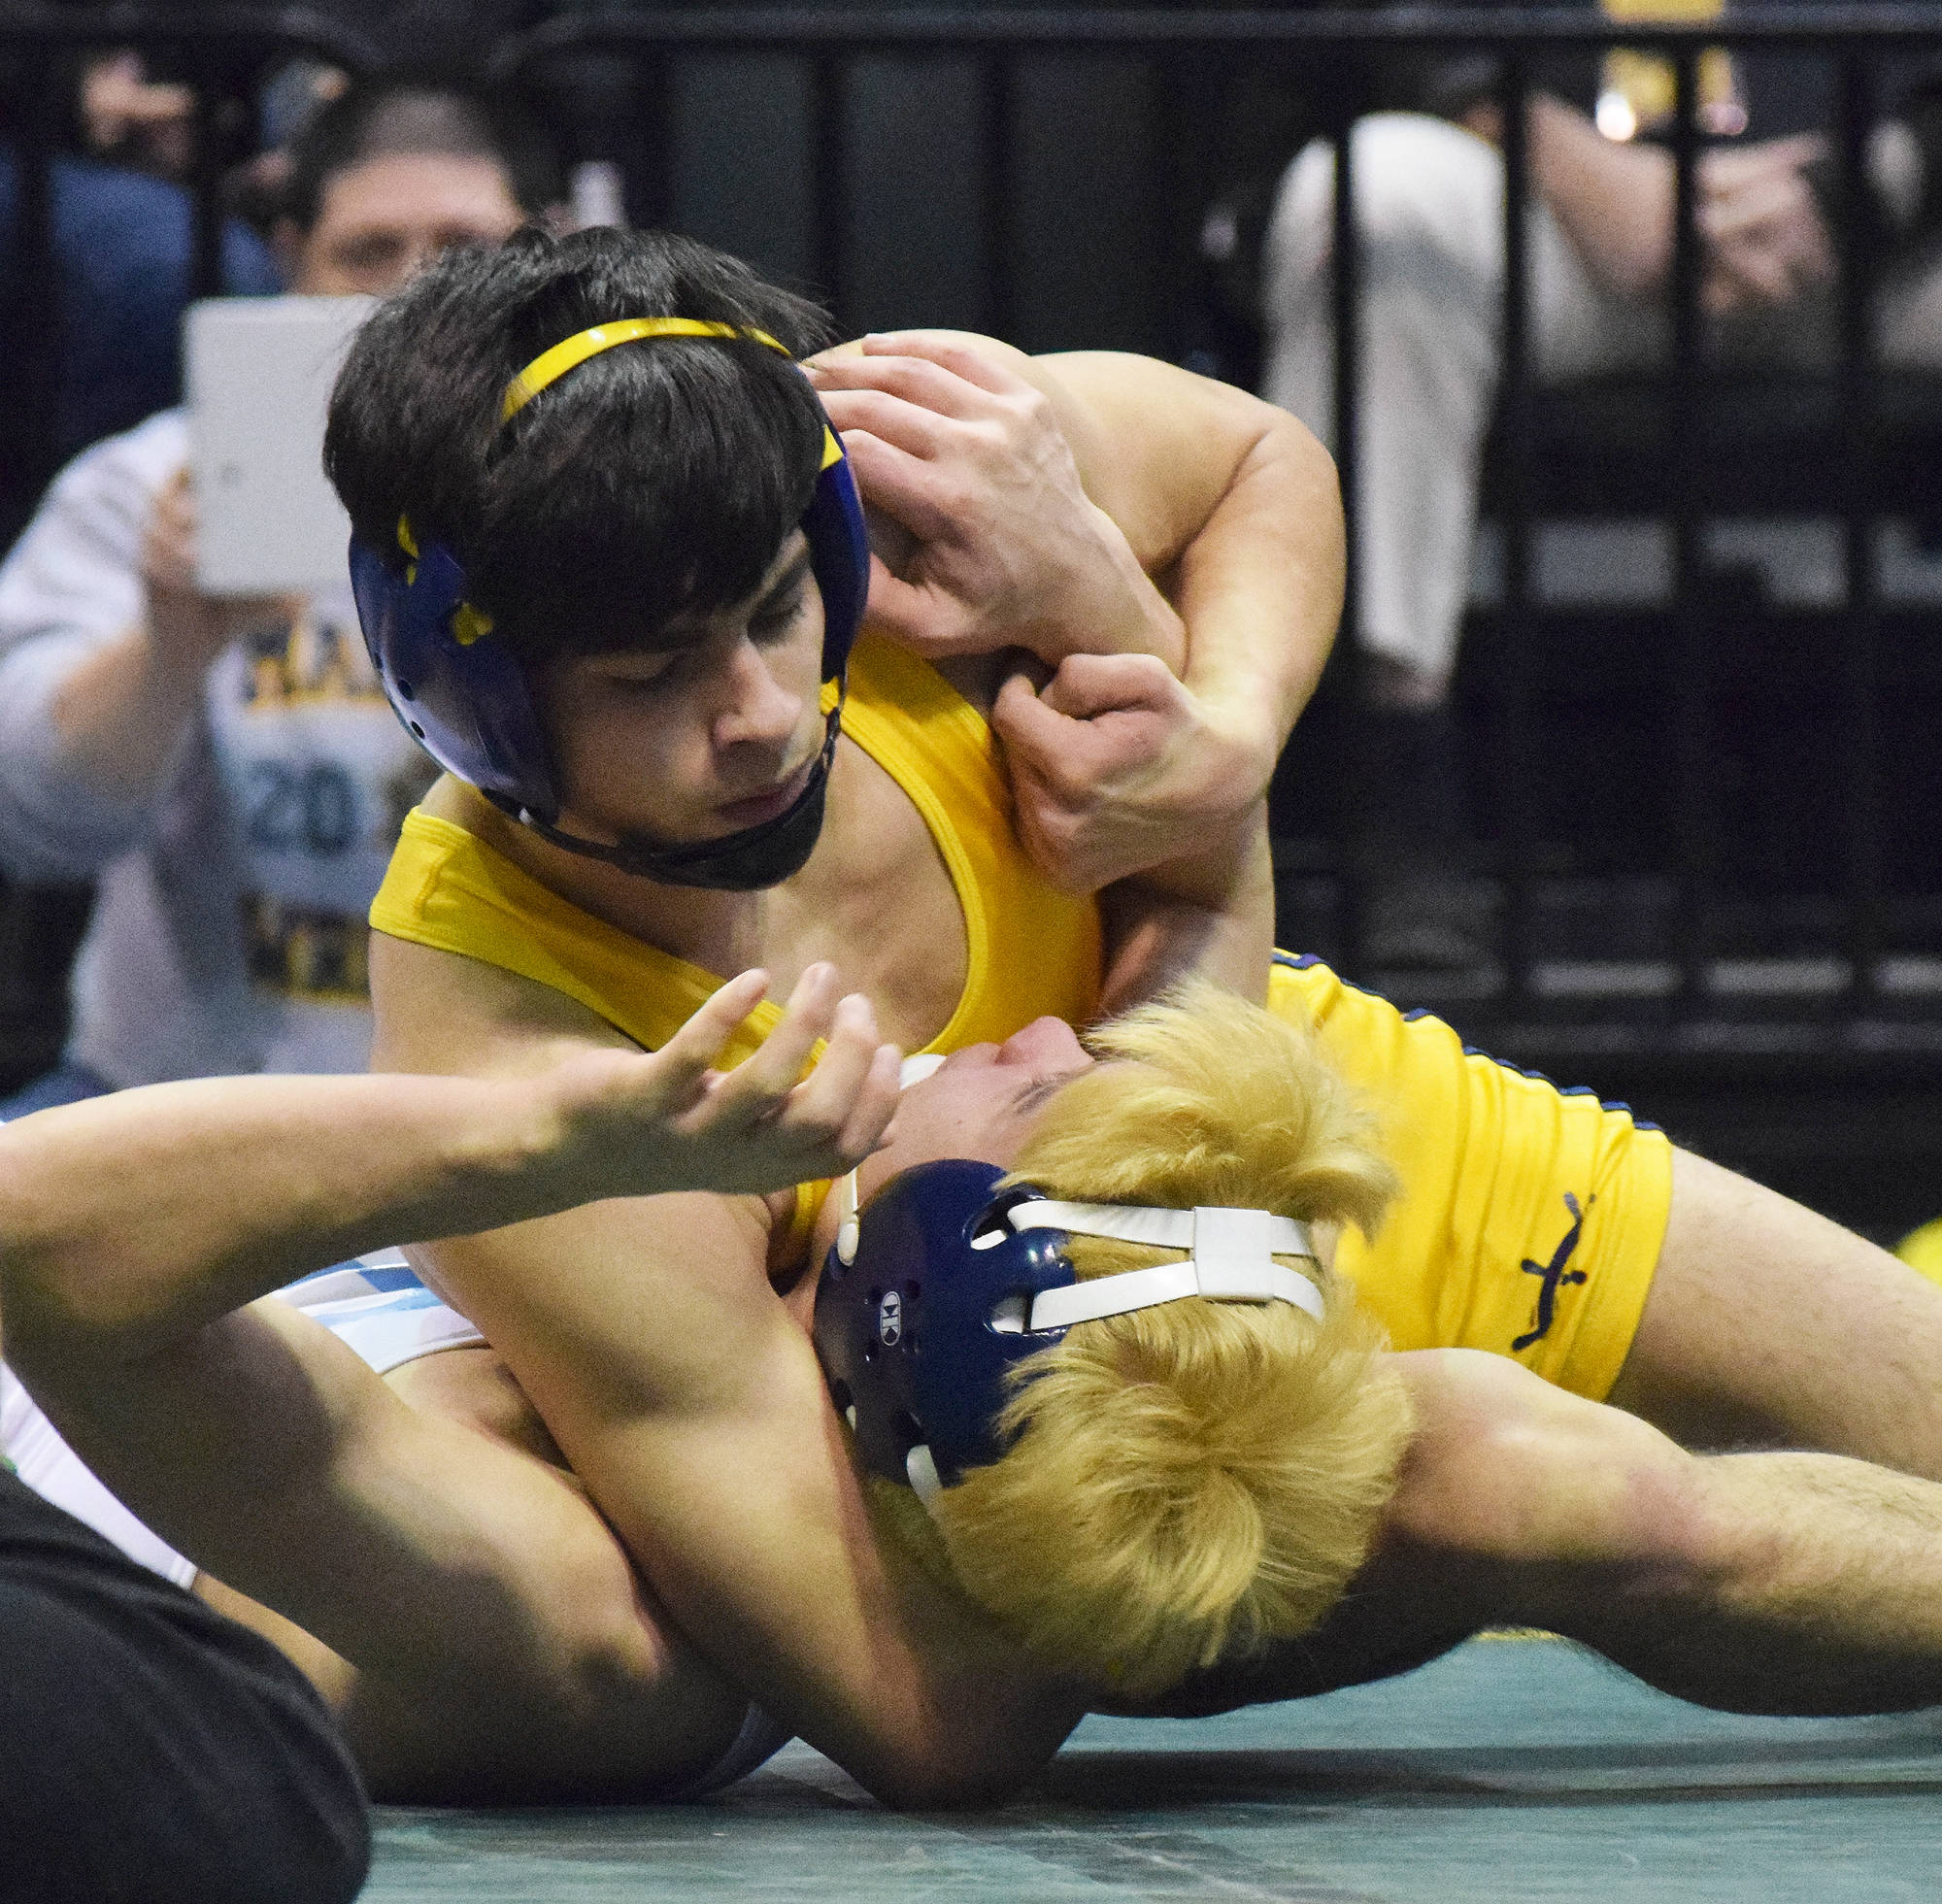 Homer junior Luciano Fasulo maintains control of Dillingham’s Jesse Noden in the 132-pound final Saturday night at the Division II state wrestling championships at the Alaska Airlines Center in Anchorage. (Photo by Joey Klecka/Peninsula Clarion)